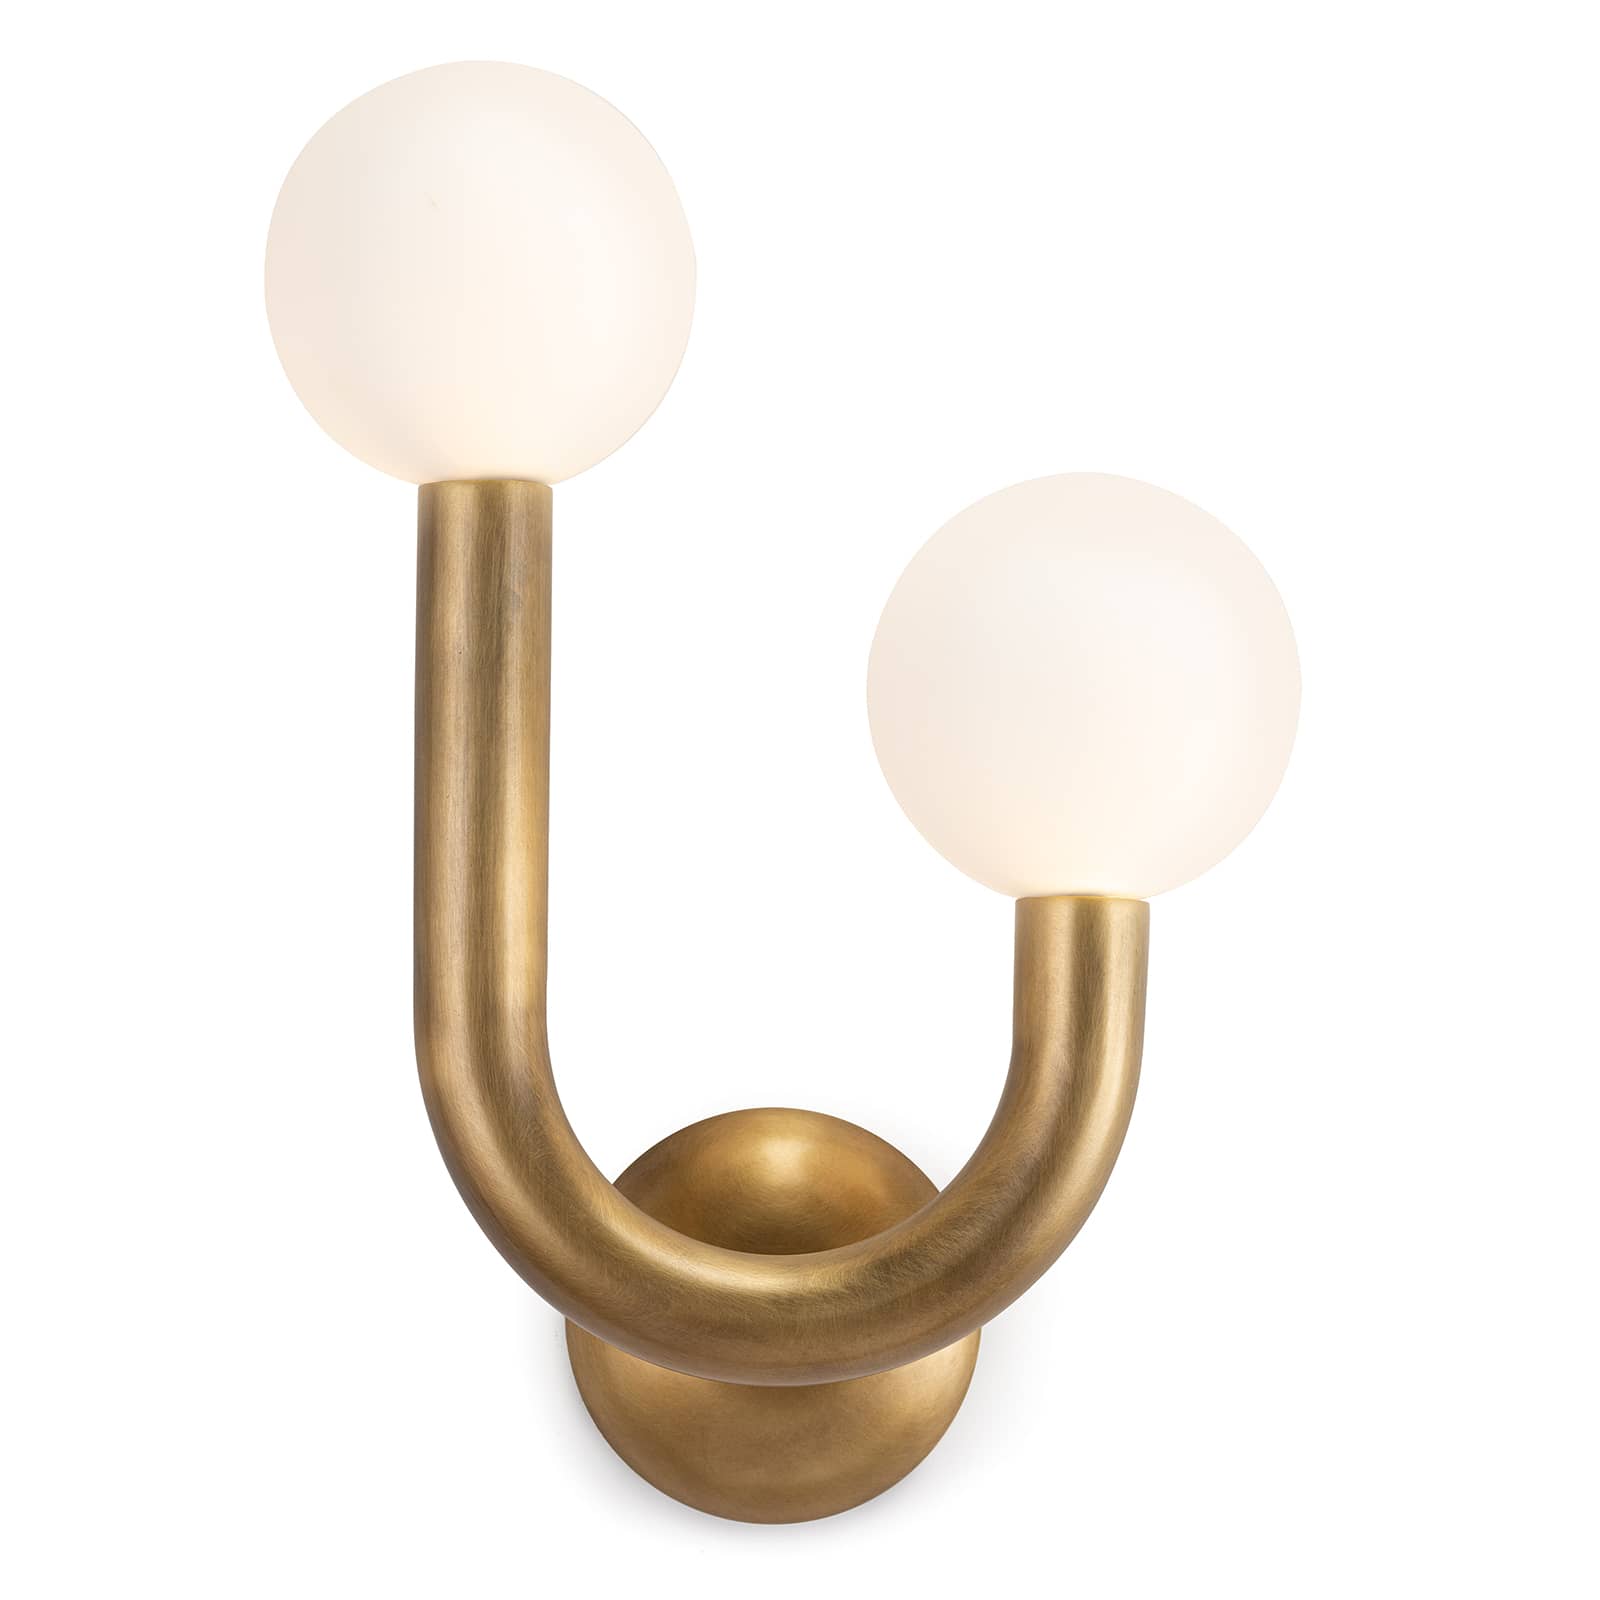 Happy Sconce Right Side - Polished Nickel - - Decor - Tipplergoods